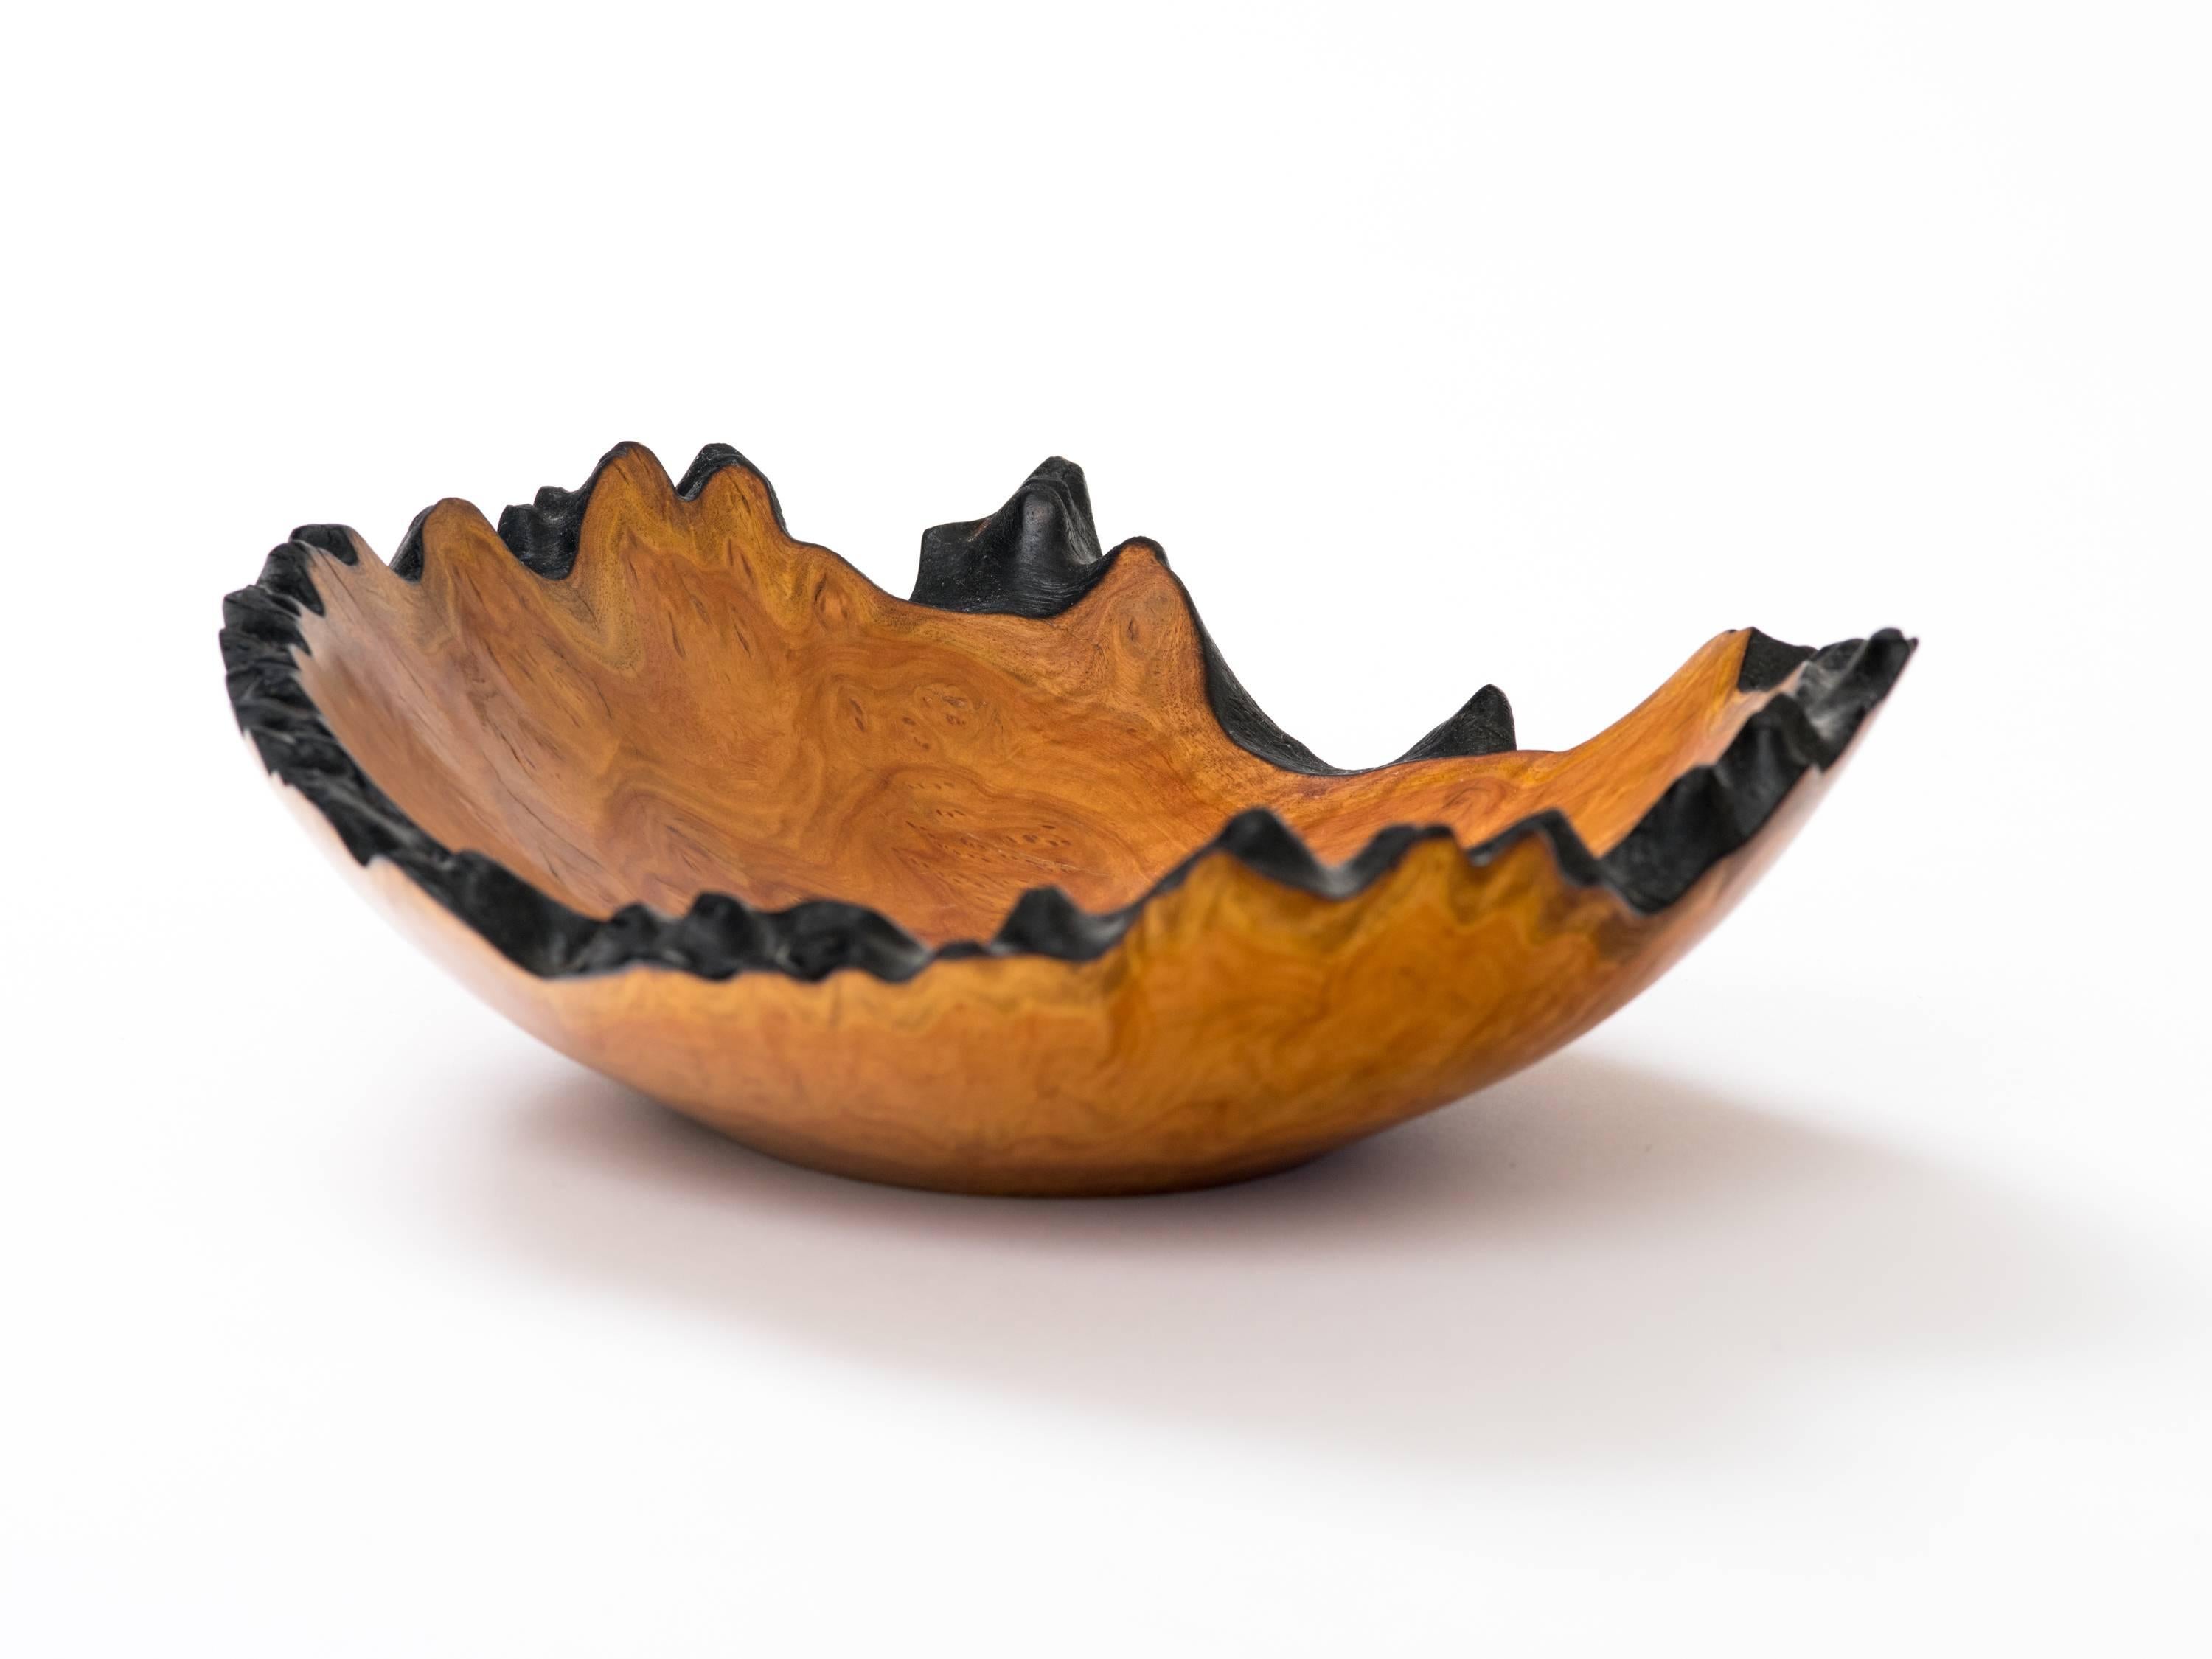 Handcrafted Coolabah burl wood bowl with natural edge. Signed by artist,
Ken Staff, 04.